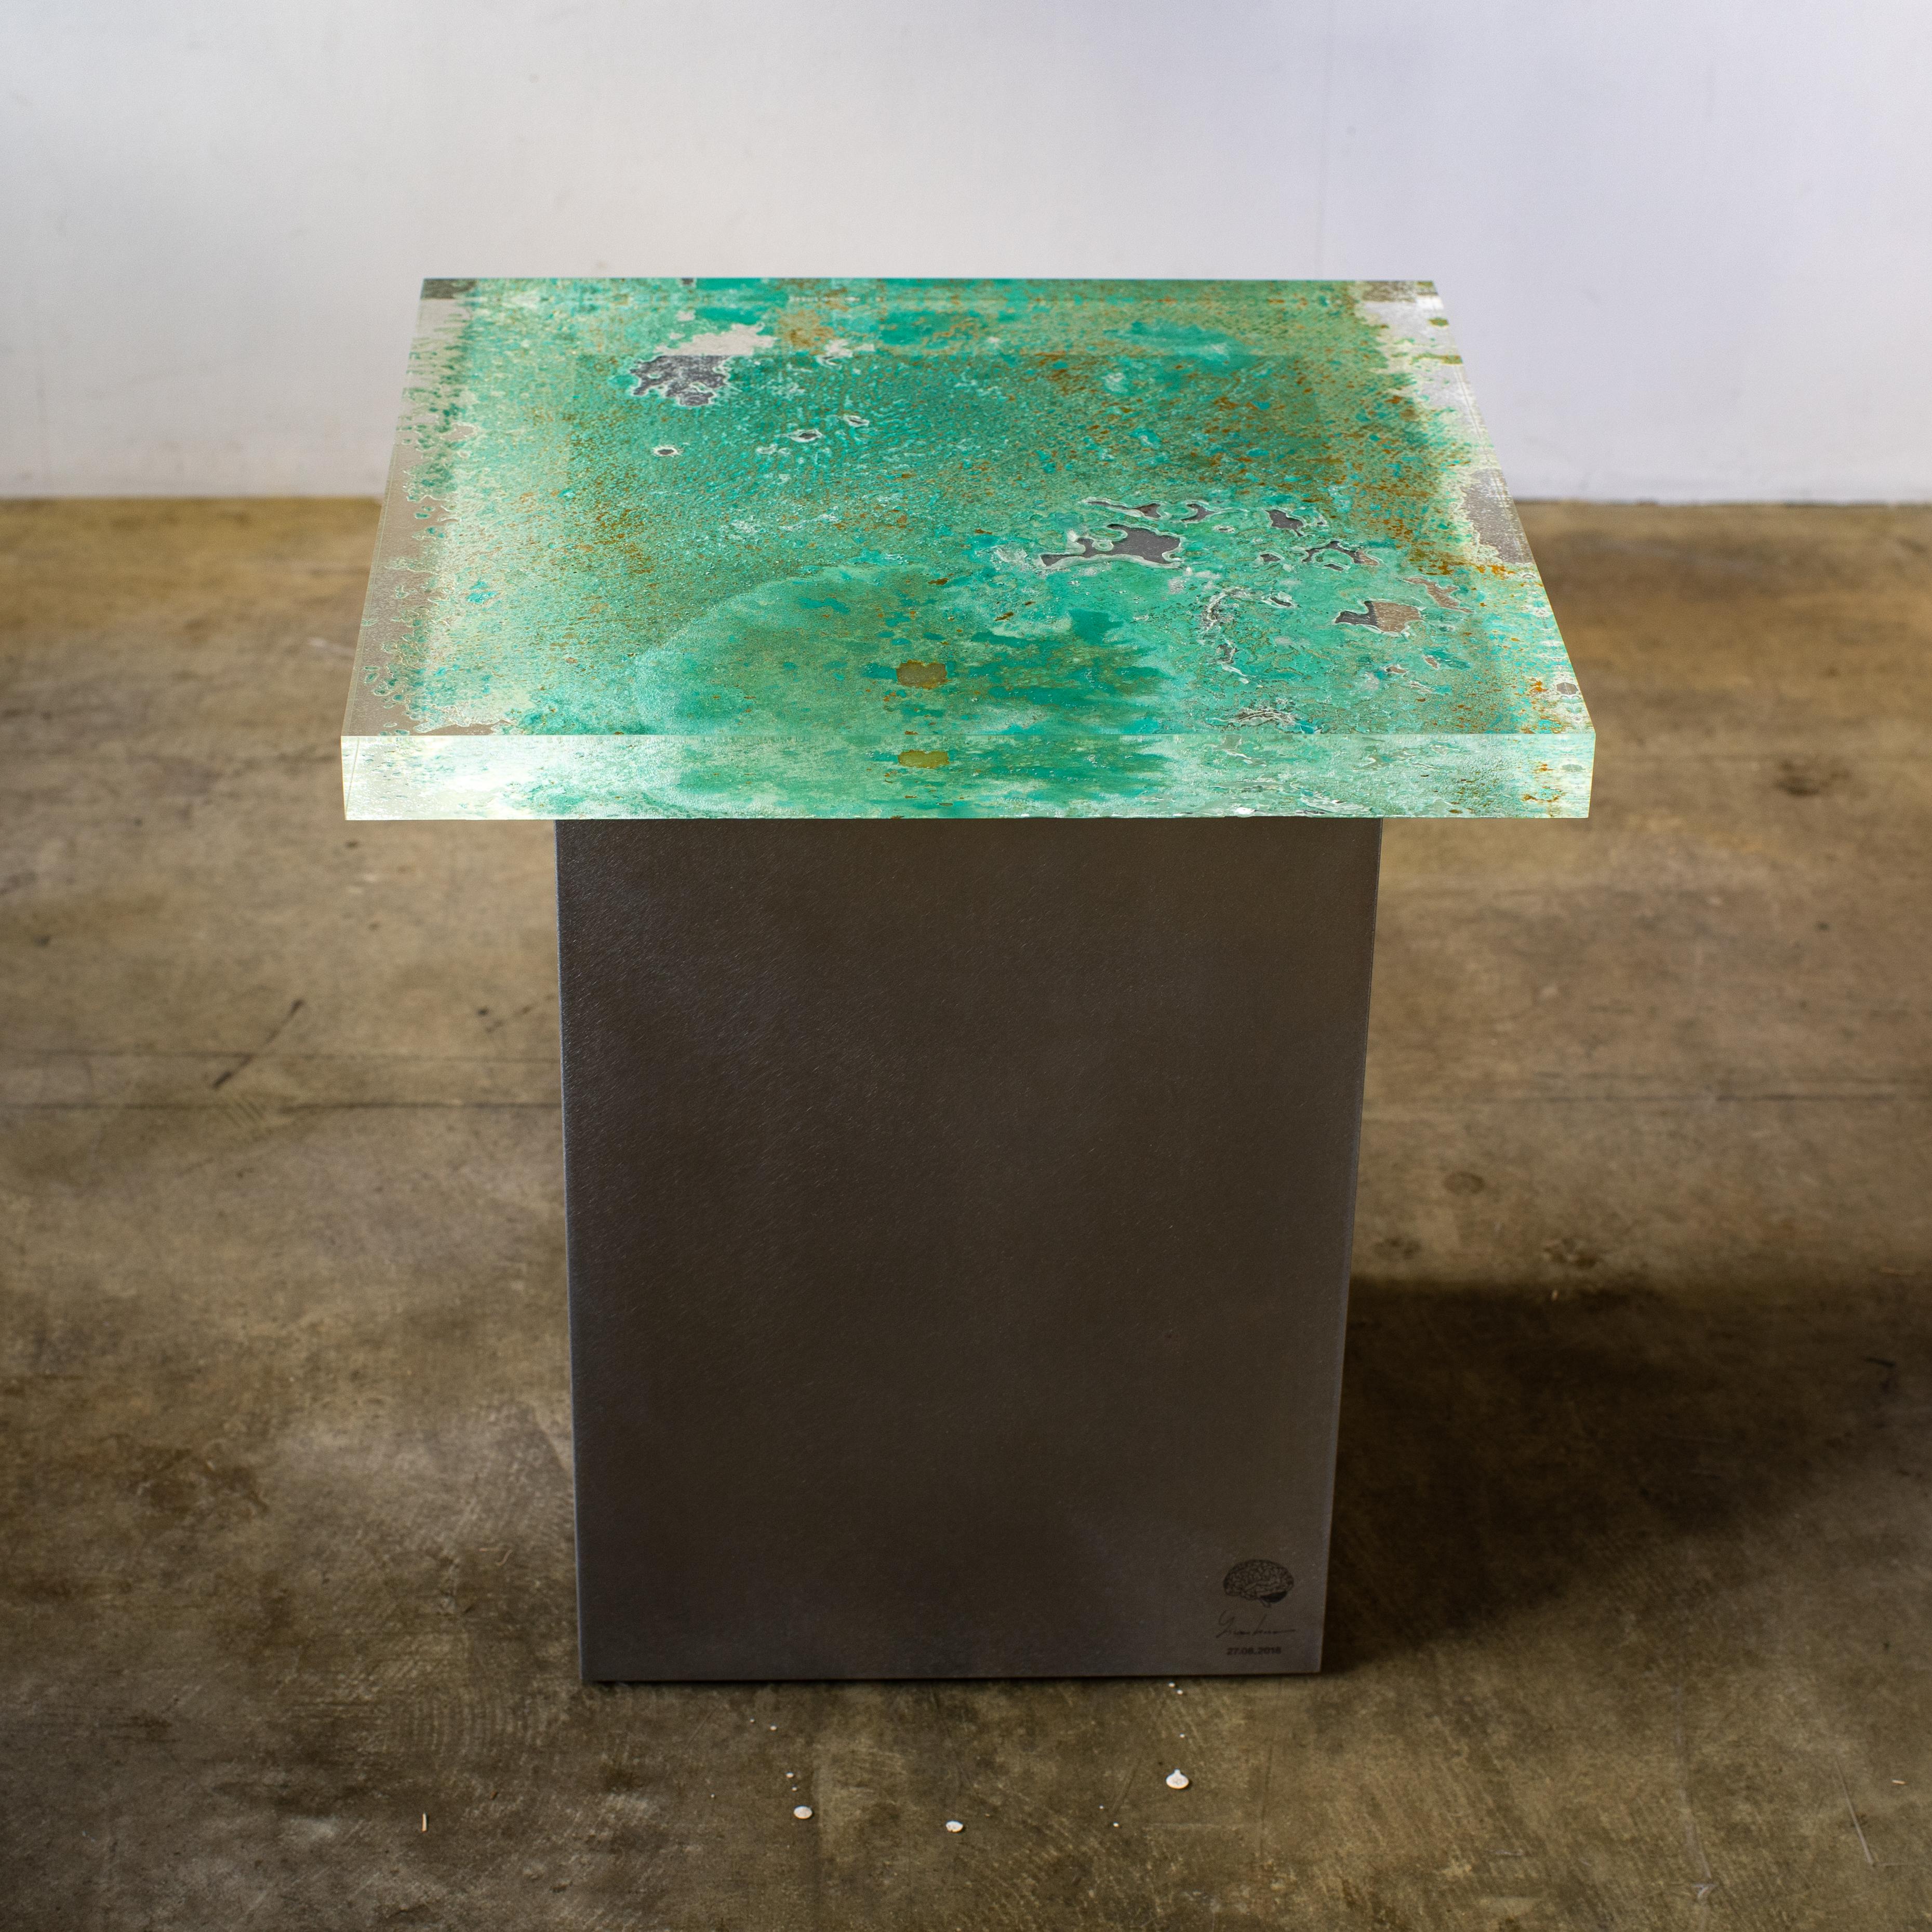 Stool designed by Yuma Kano.
Green colored materials are acrylic. This acrylic is what rust was transformed. Artist calls it 